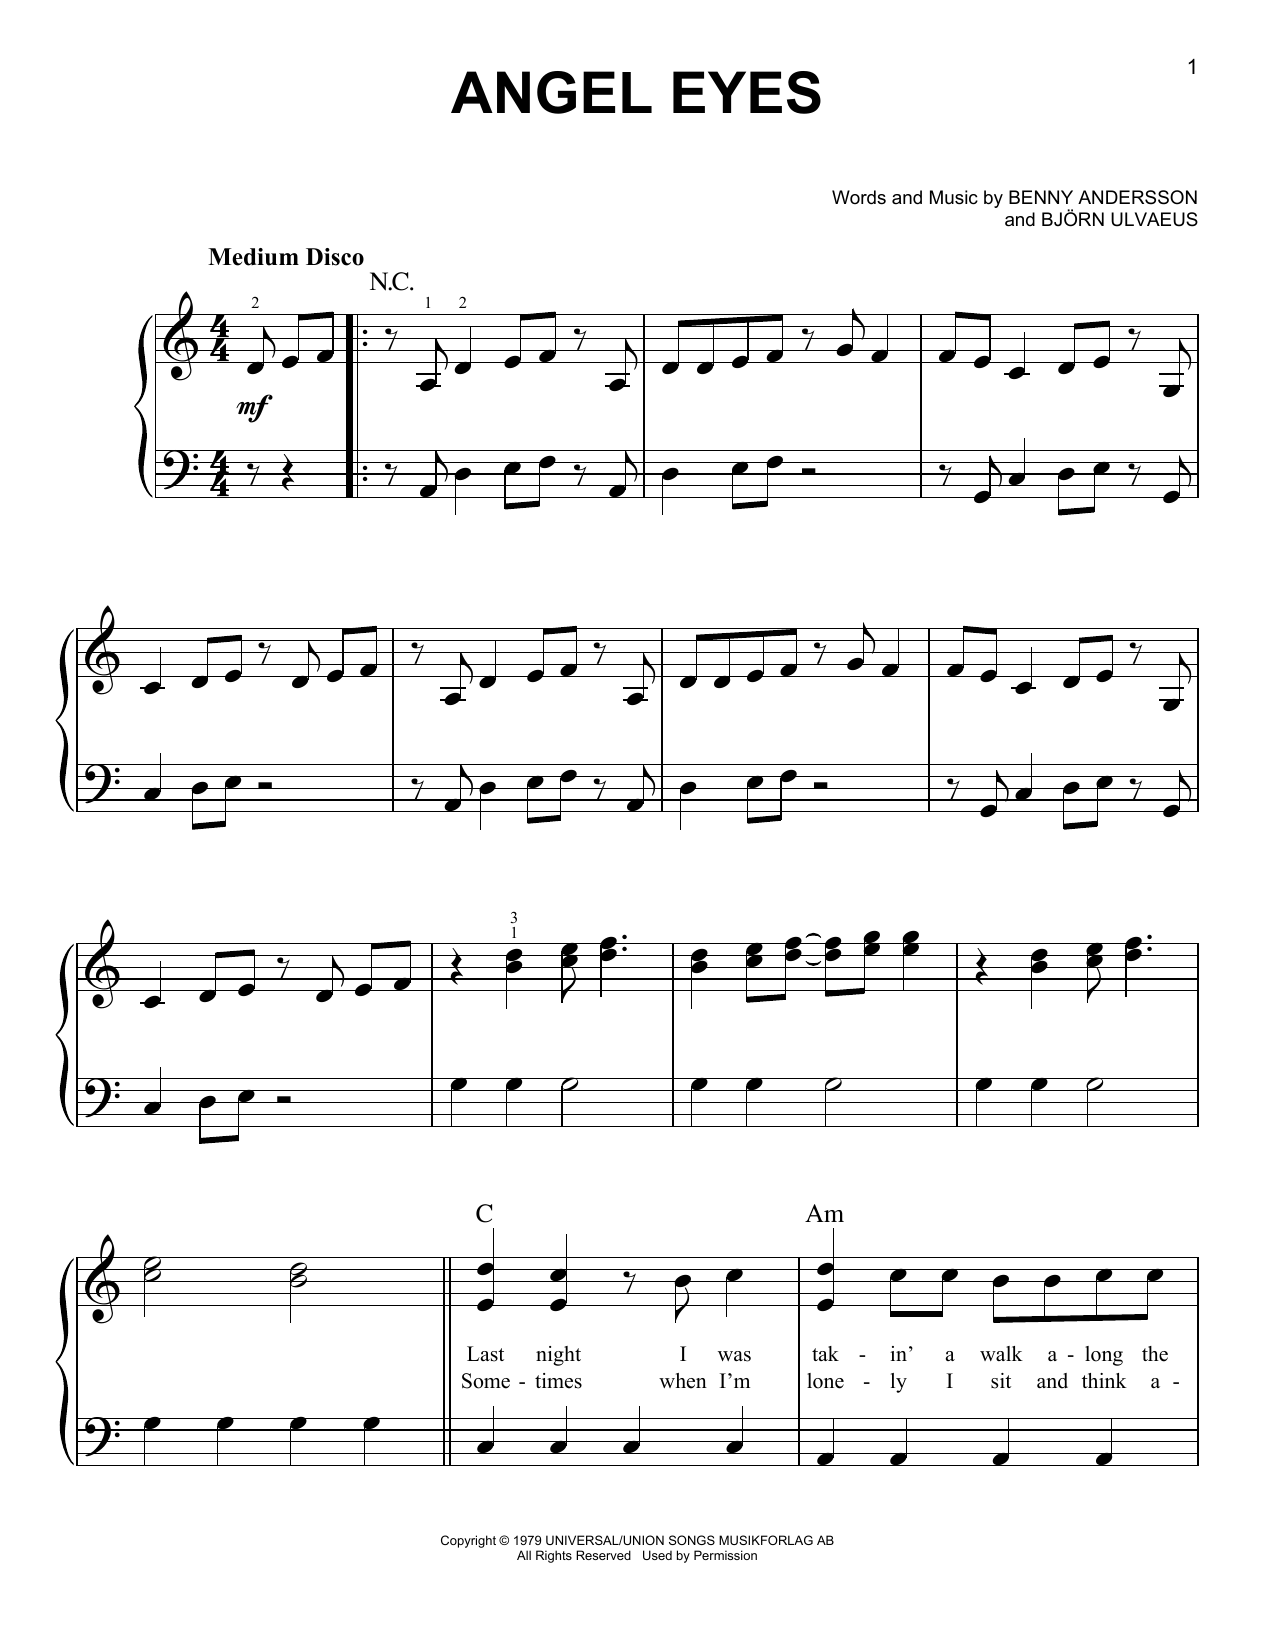 ABBA Angeleyes (from Mamma Mia! Here We Go Again) sheet music notes and chords. Download Printable PDF.